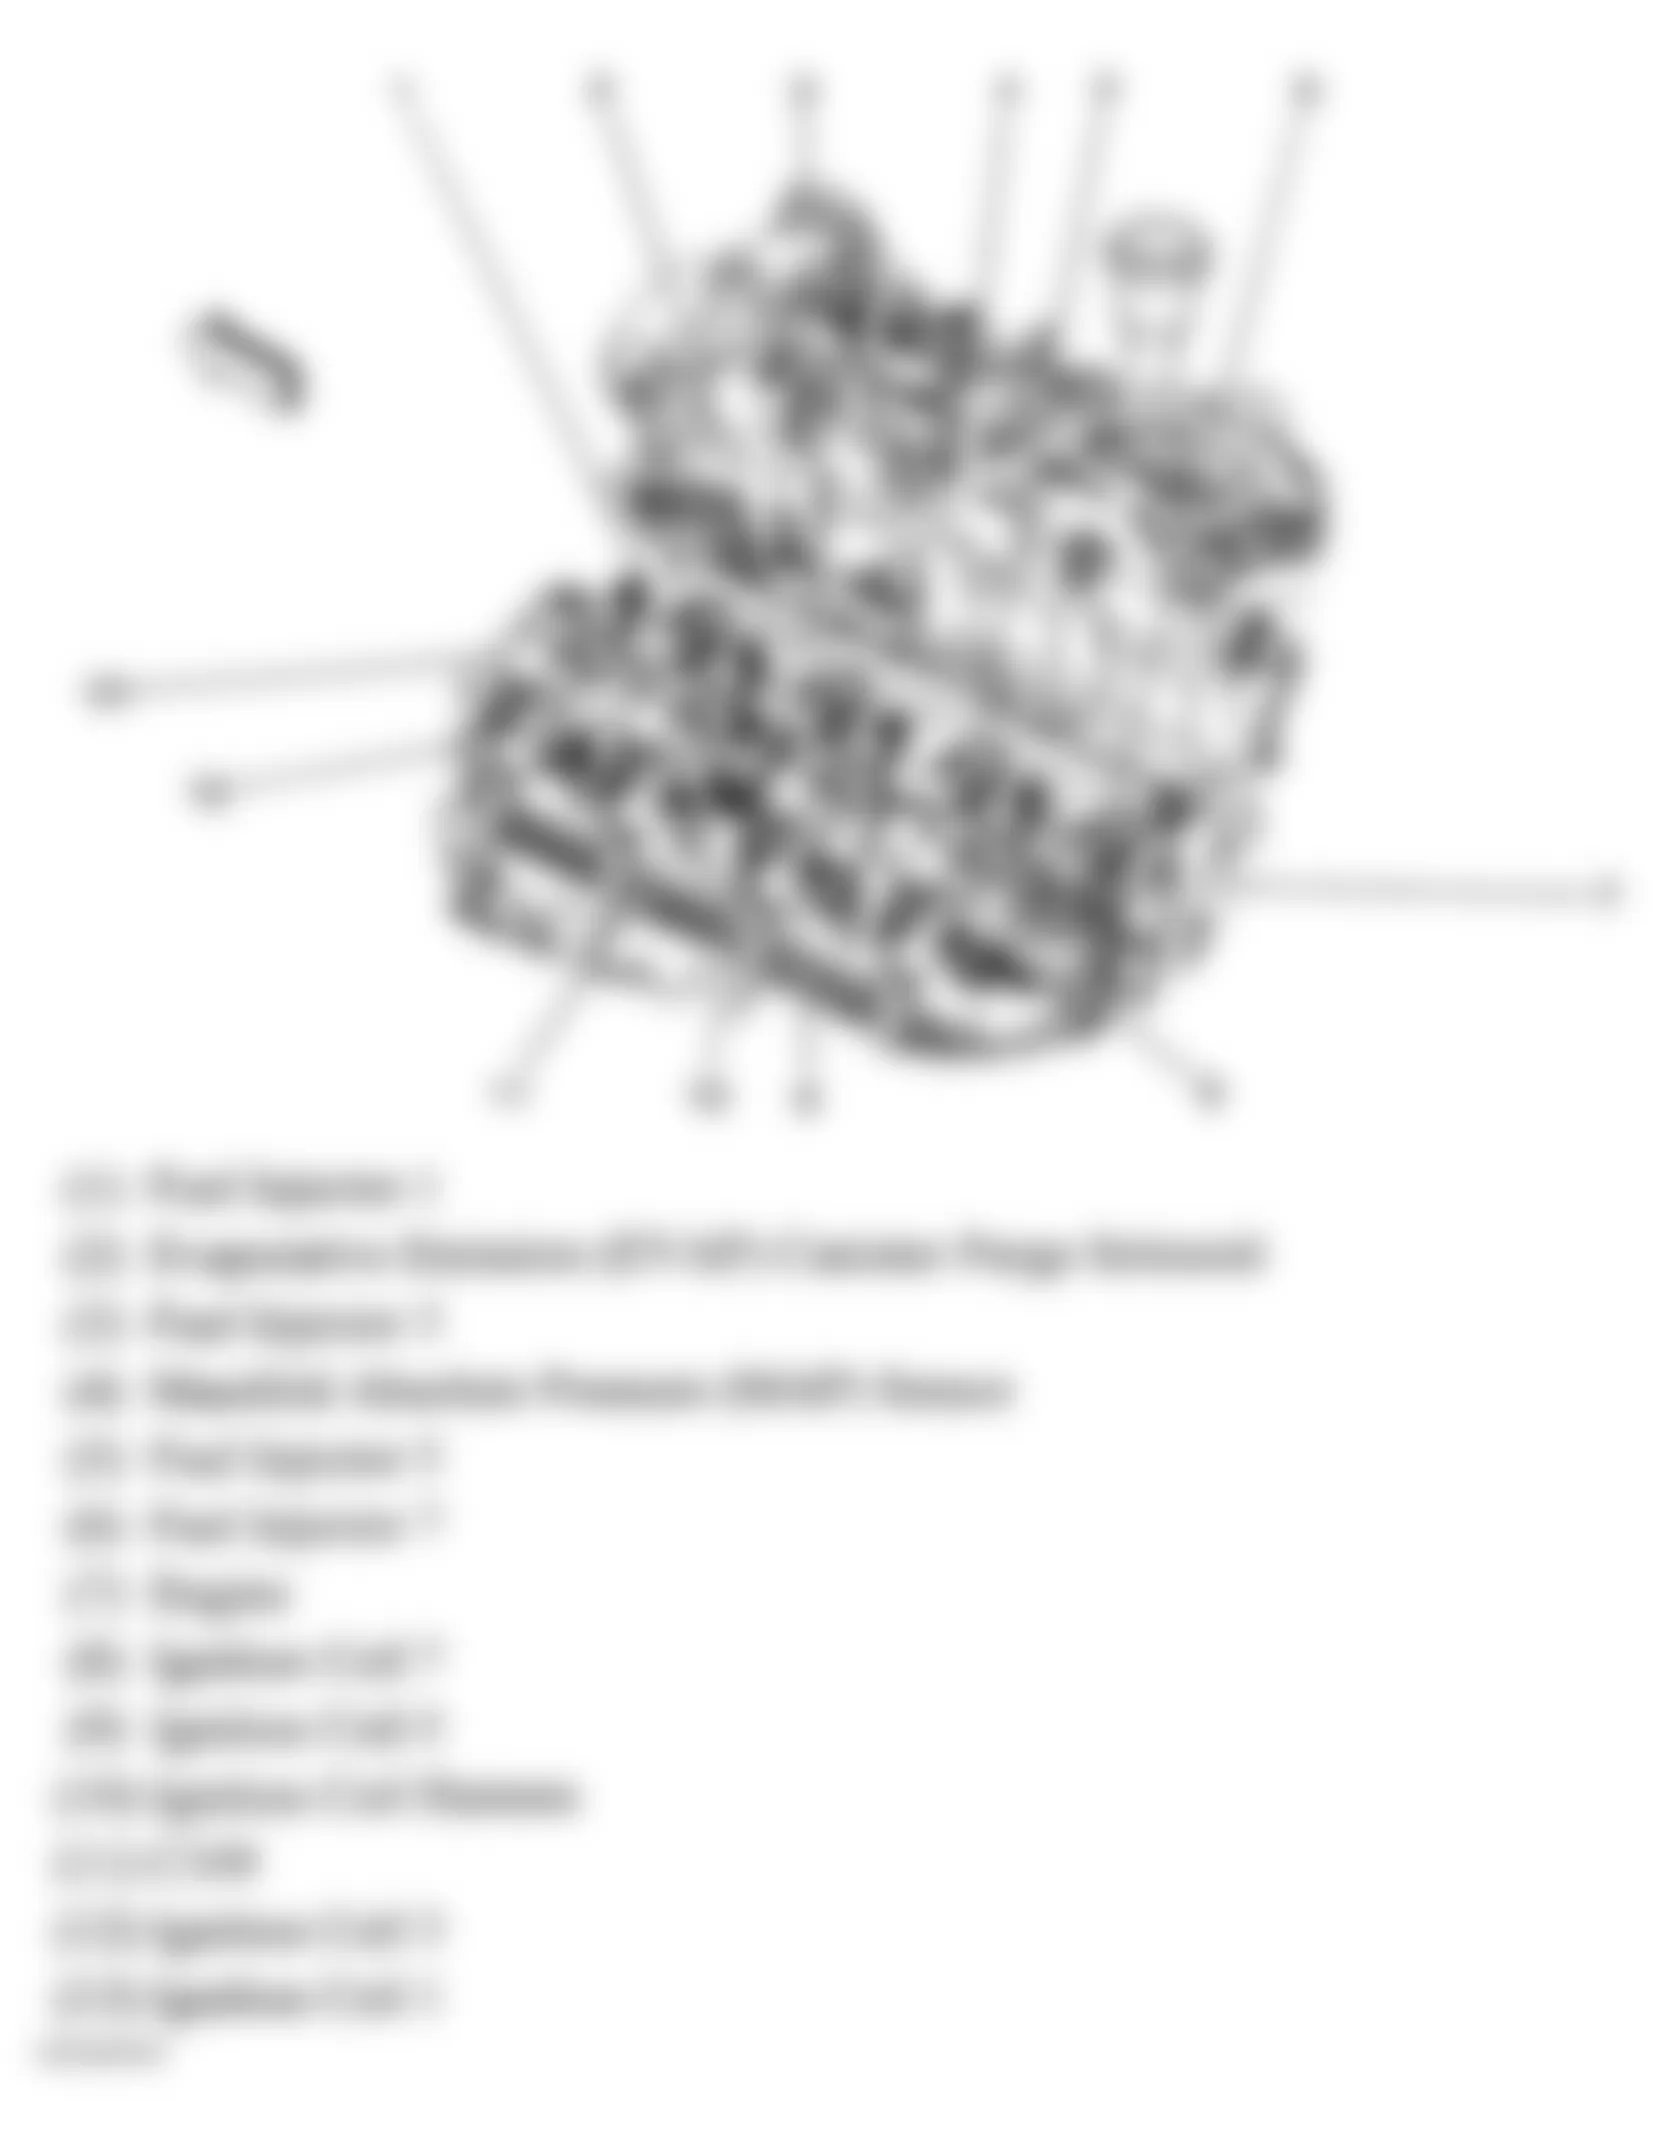 Buick Rainier 2005 - Component Locations -  Upper Left Side Of Engine (5.3L)